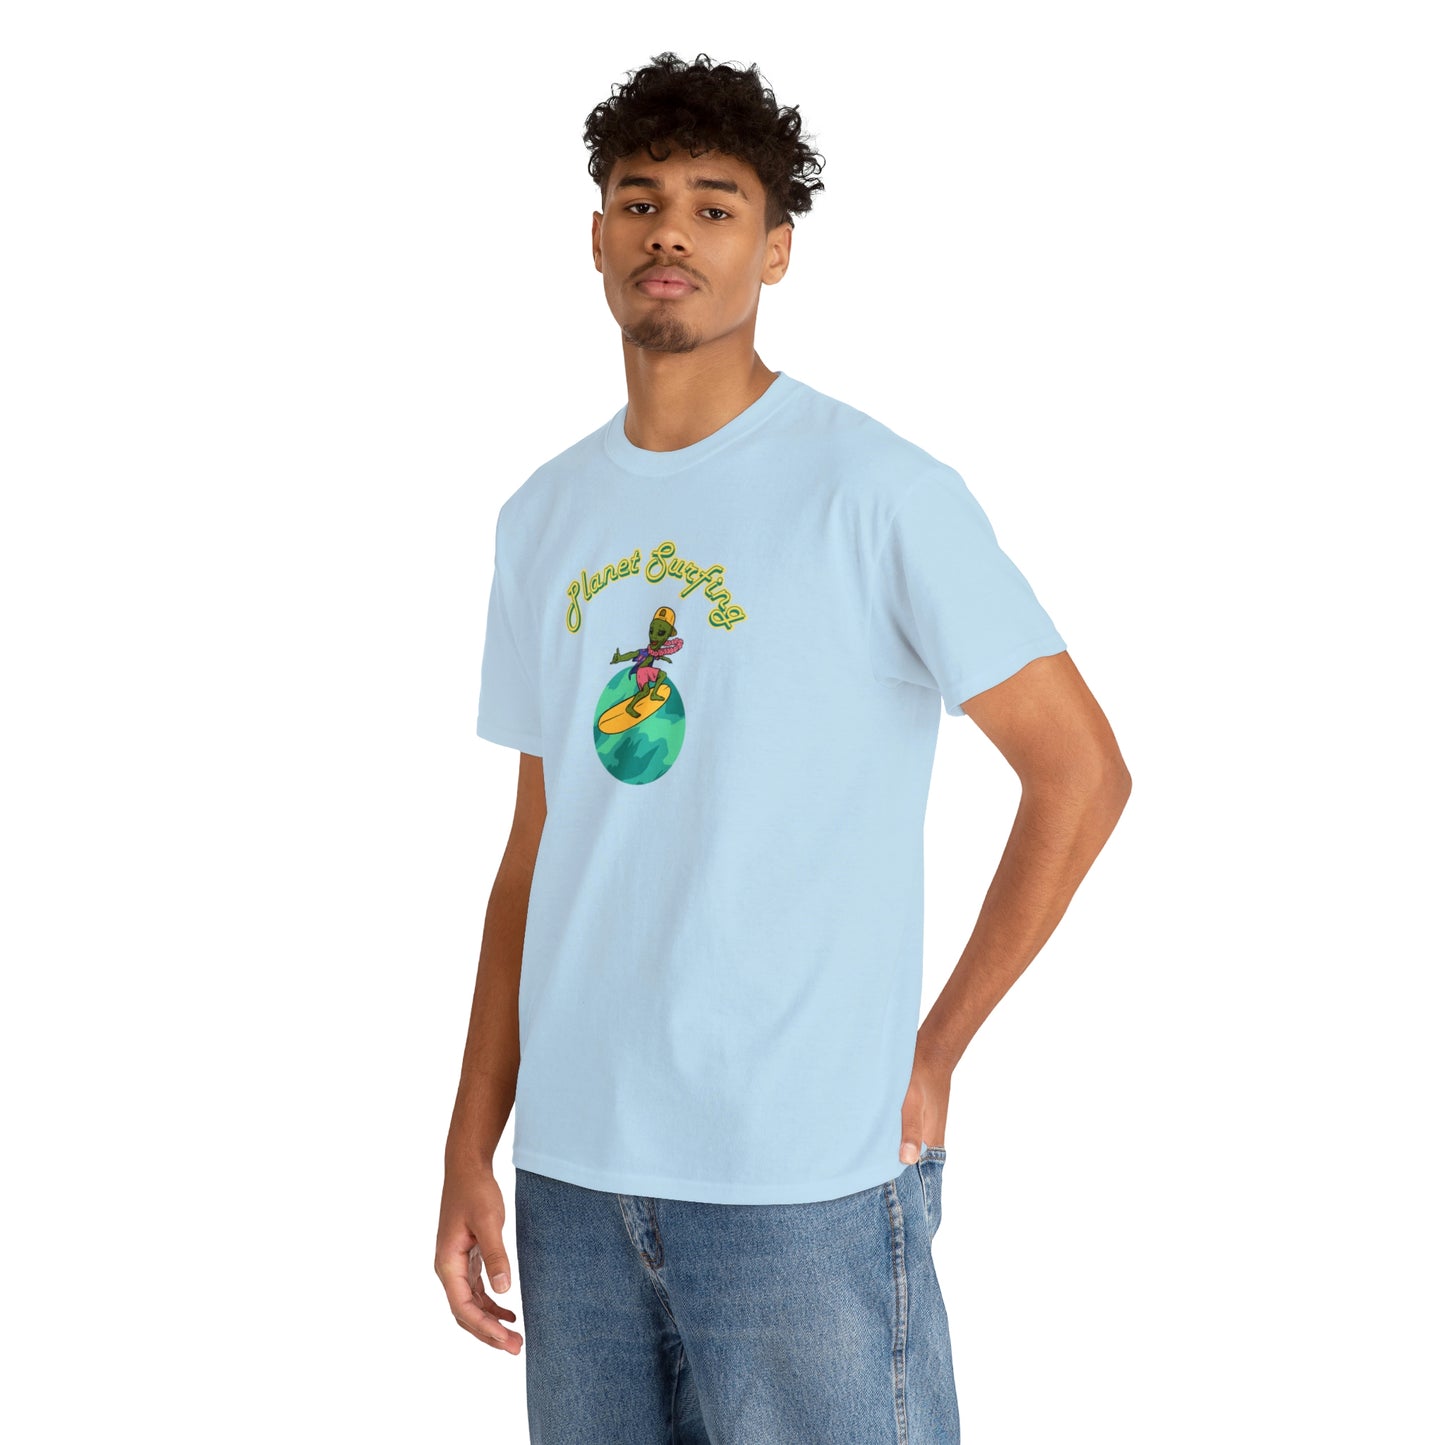 Planet Surfing Tee